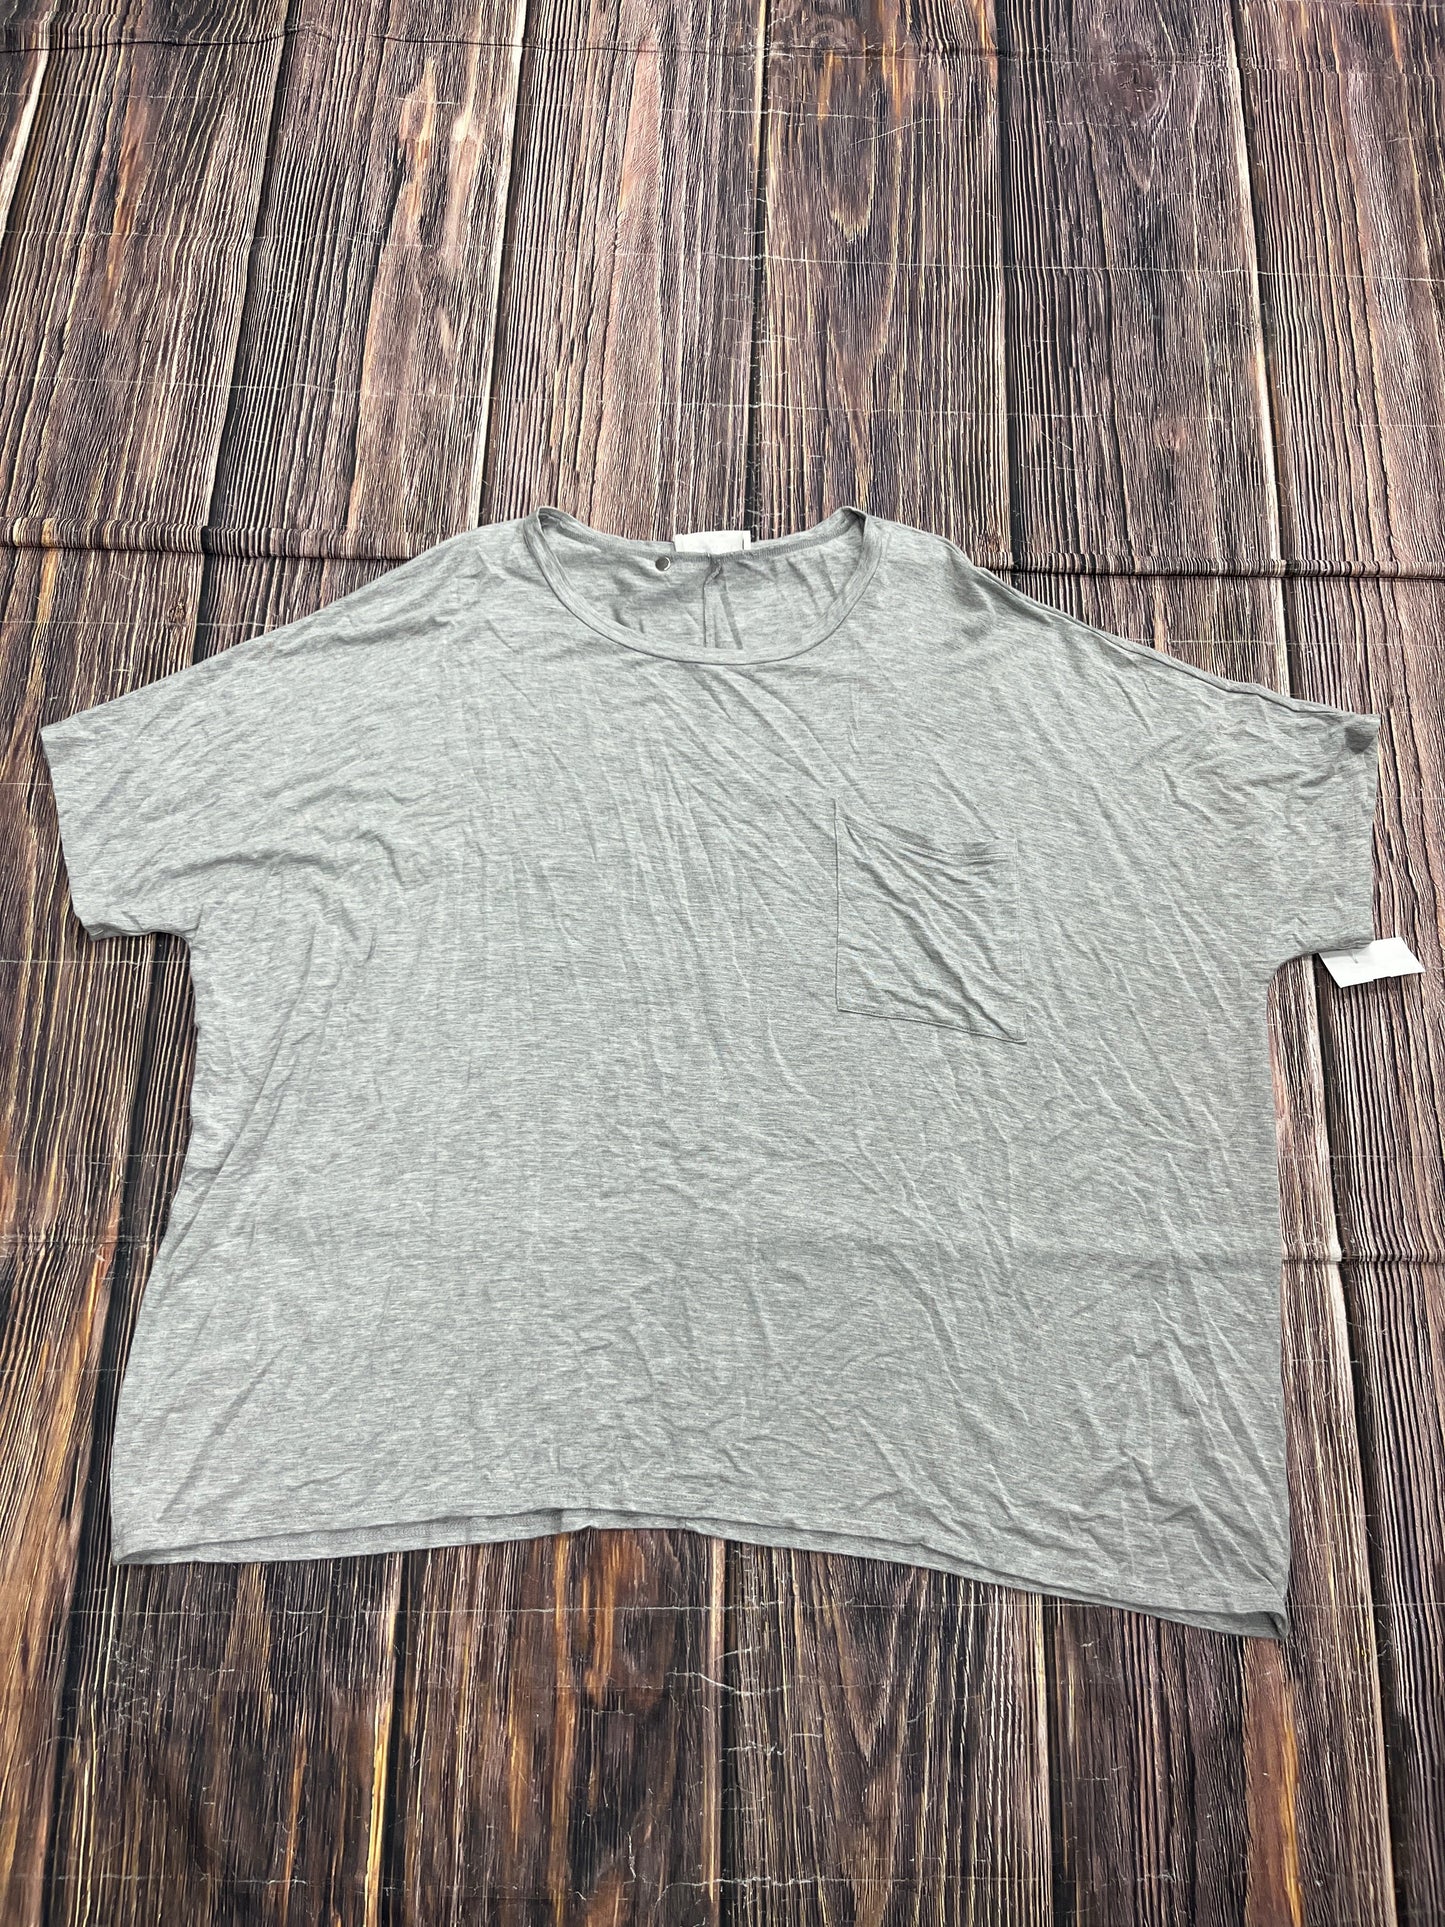 Grey Top Short Sleeve Basic Zenana Outfitters, Size M